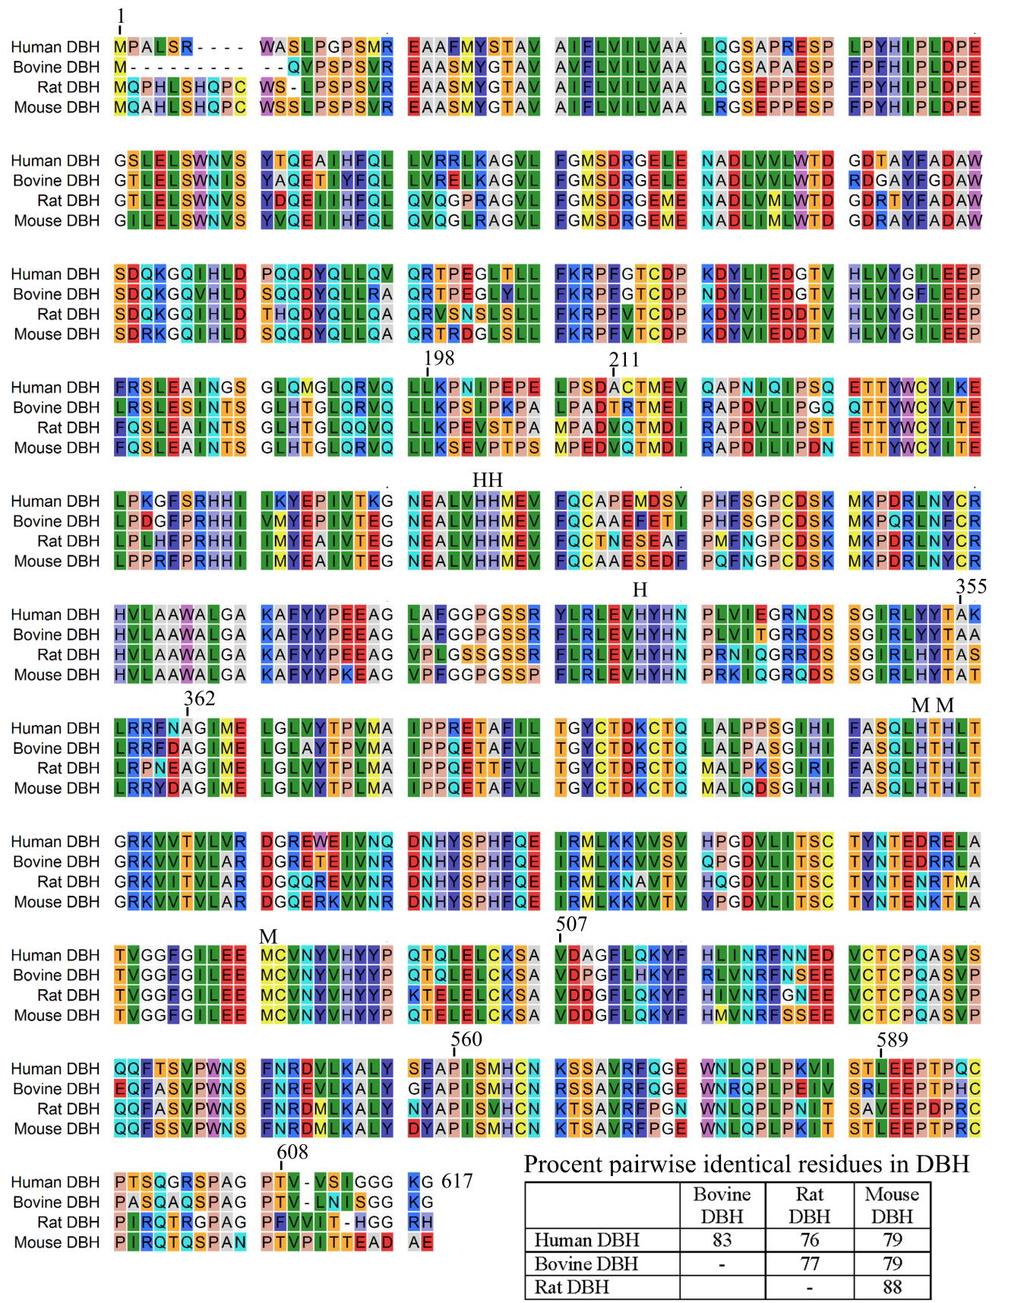 fig. S3. Sequence alignment of DBH from different organisms.